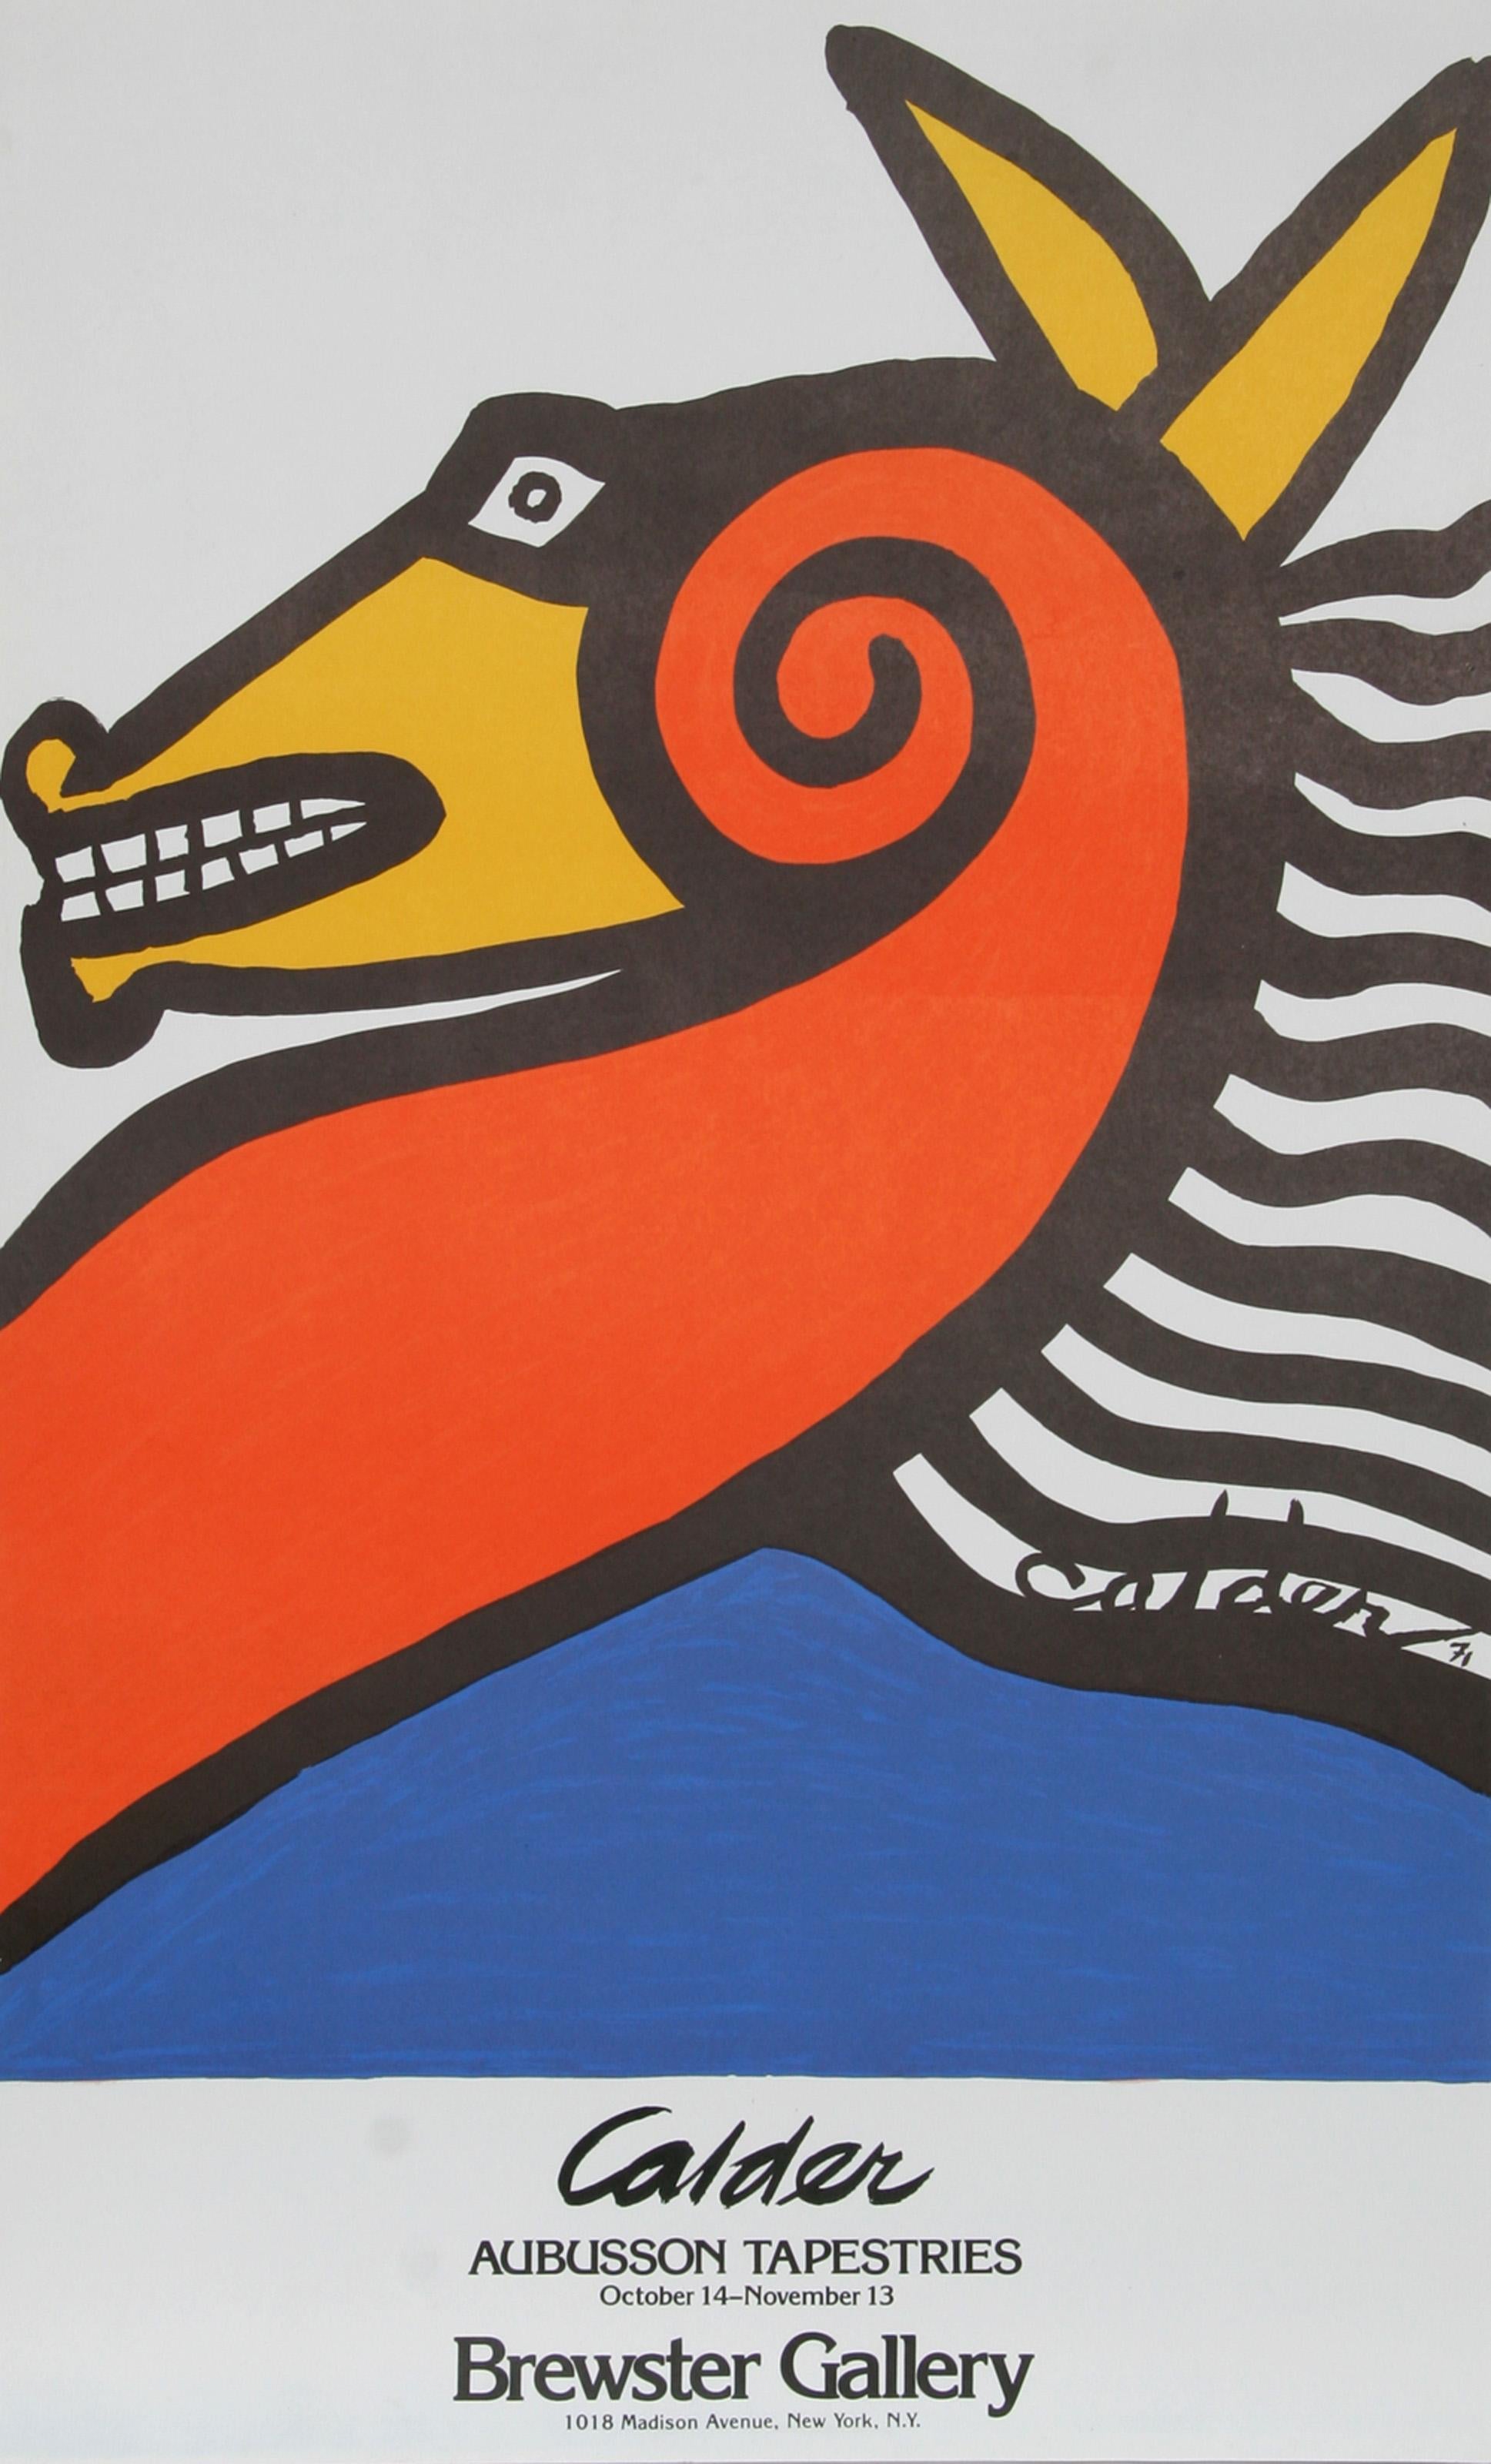 Alexander Calder, After, American (1898 - 1976) -  Exhibition at Brewster Gallery. Year: circa 1975, Medium: Lithograph Poster, Size: 35 in. x 21.5 in. (88.9 cm x 54.61 cm) 